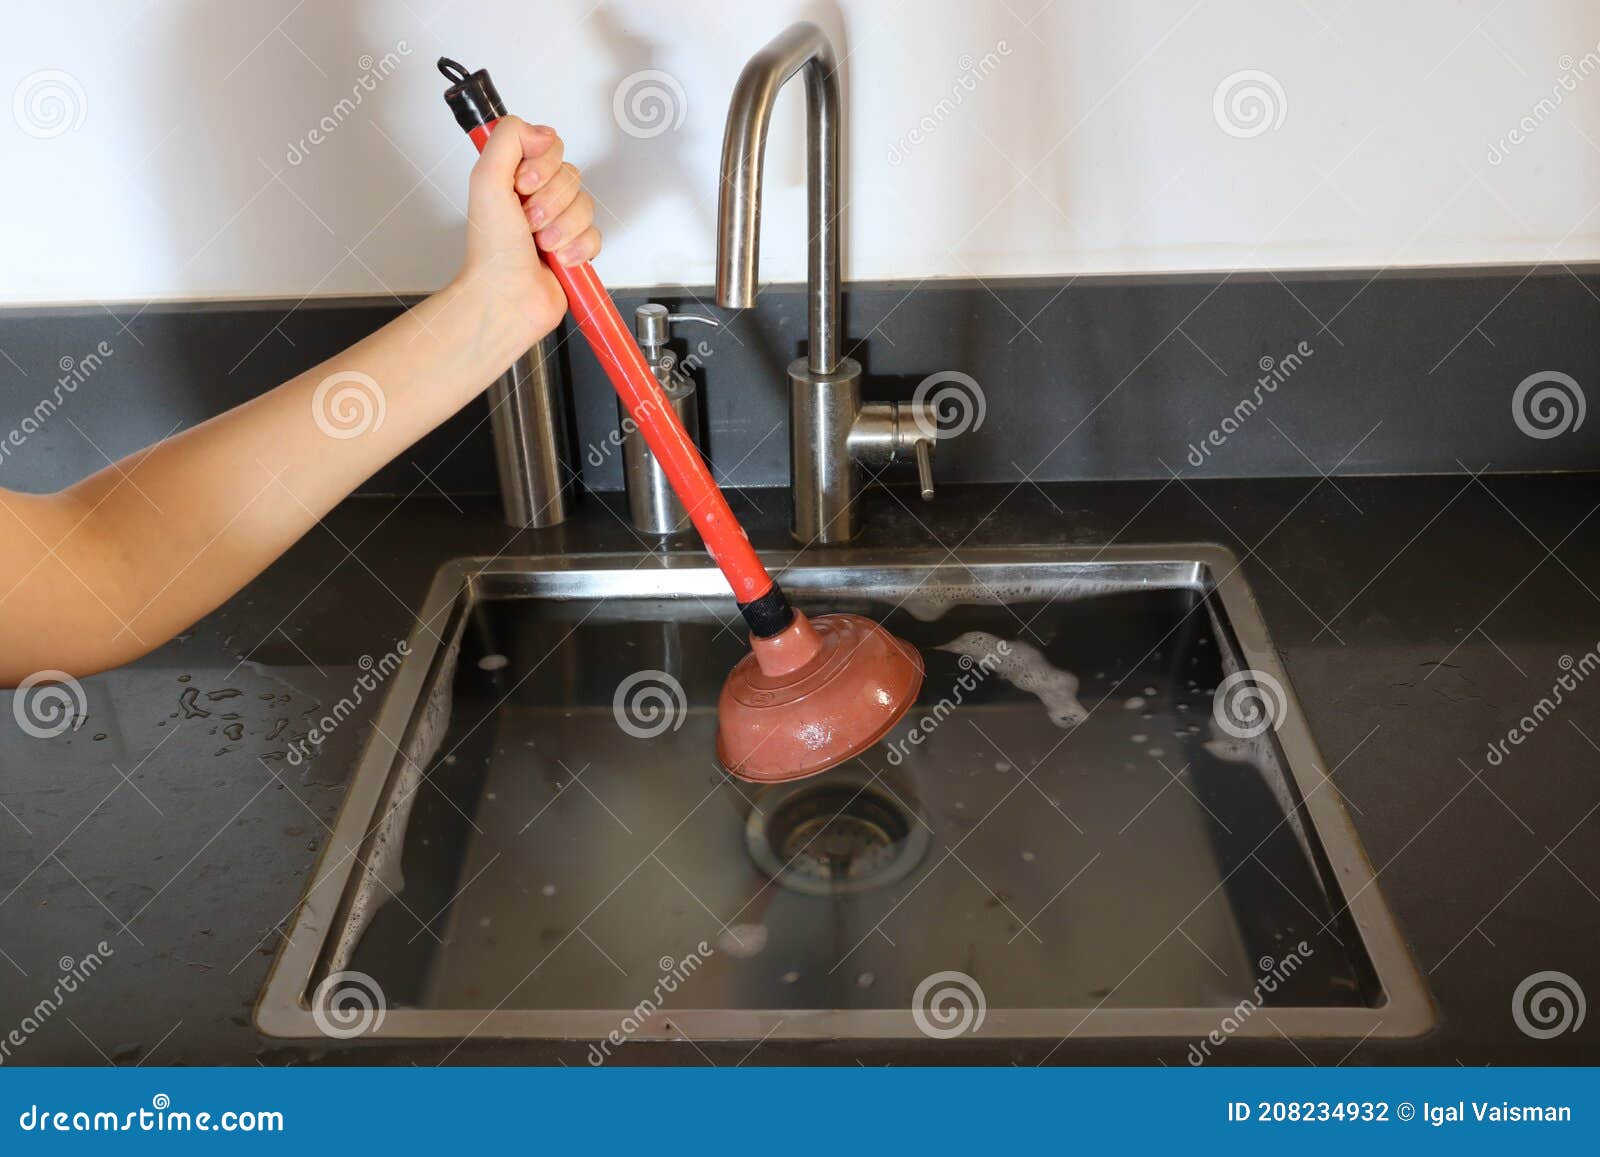 https://thumbs.dreamstime.com/z/overflowing-kitchen-sink-clogged-drain-hand-holding-plunger-overflowing-kitchen-sink-clogged-drain-hand-holding-plunger-force-cup-208234932.jpg